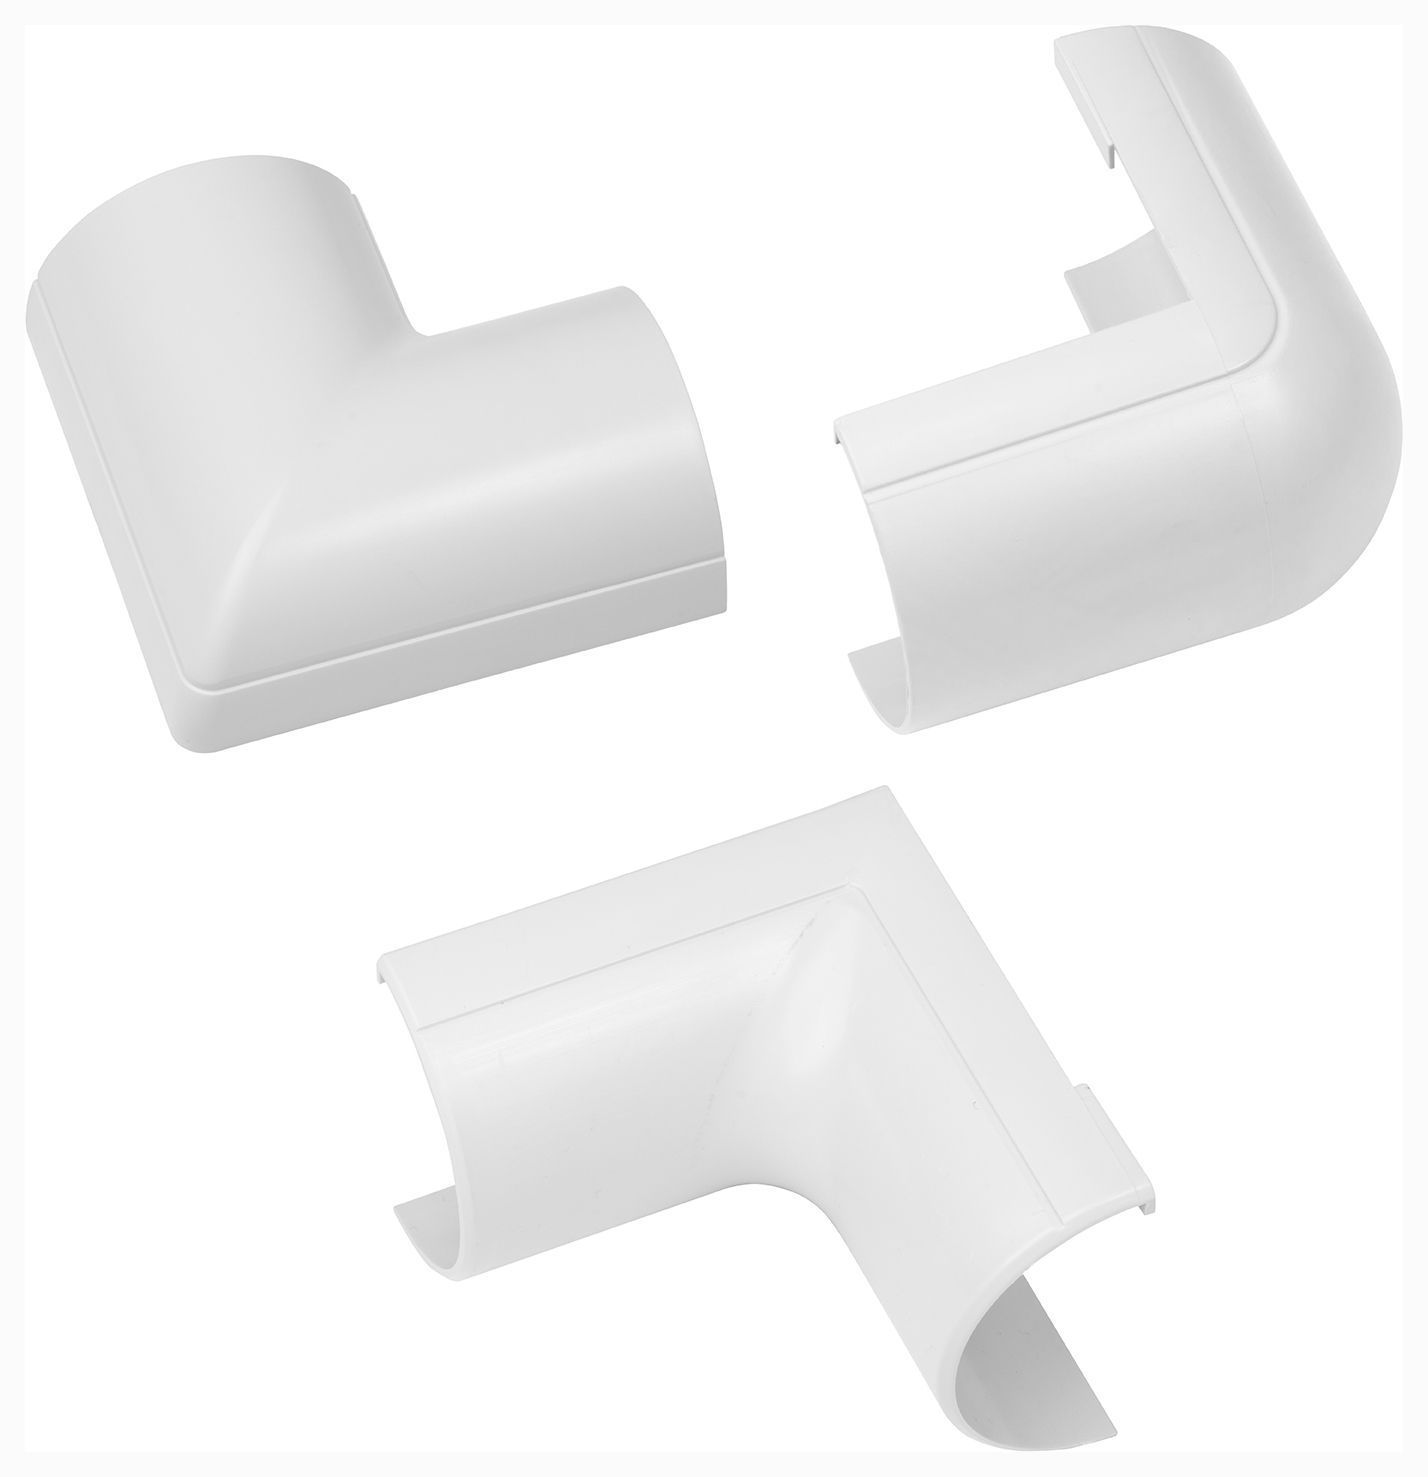 Image of D-Line 50 x 25mm Trunking Accessory Multi-Pack - Pack of 3